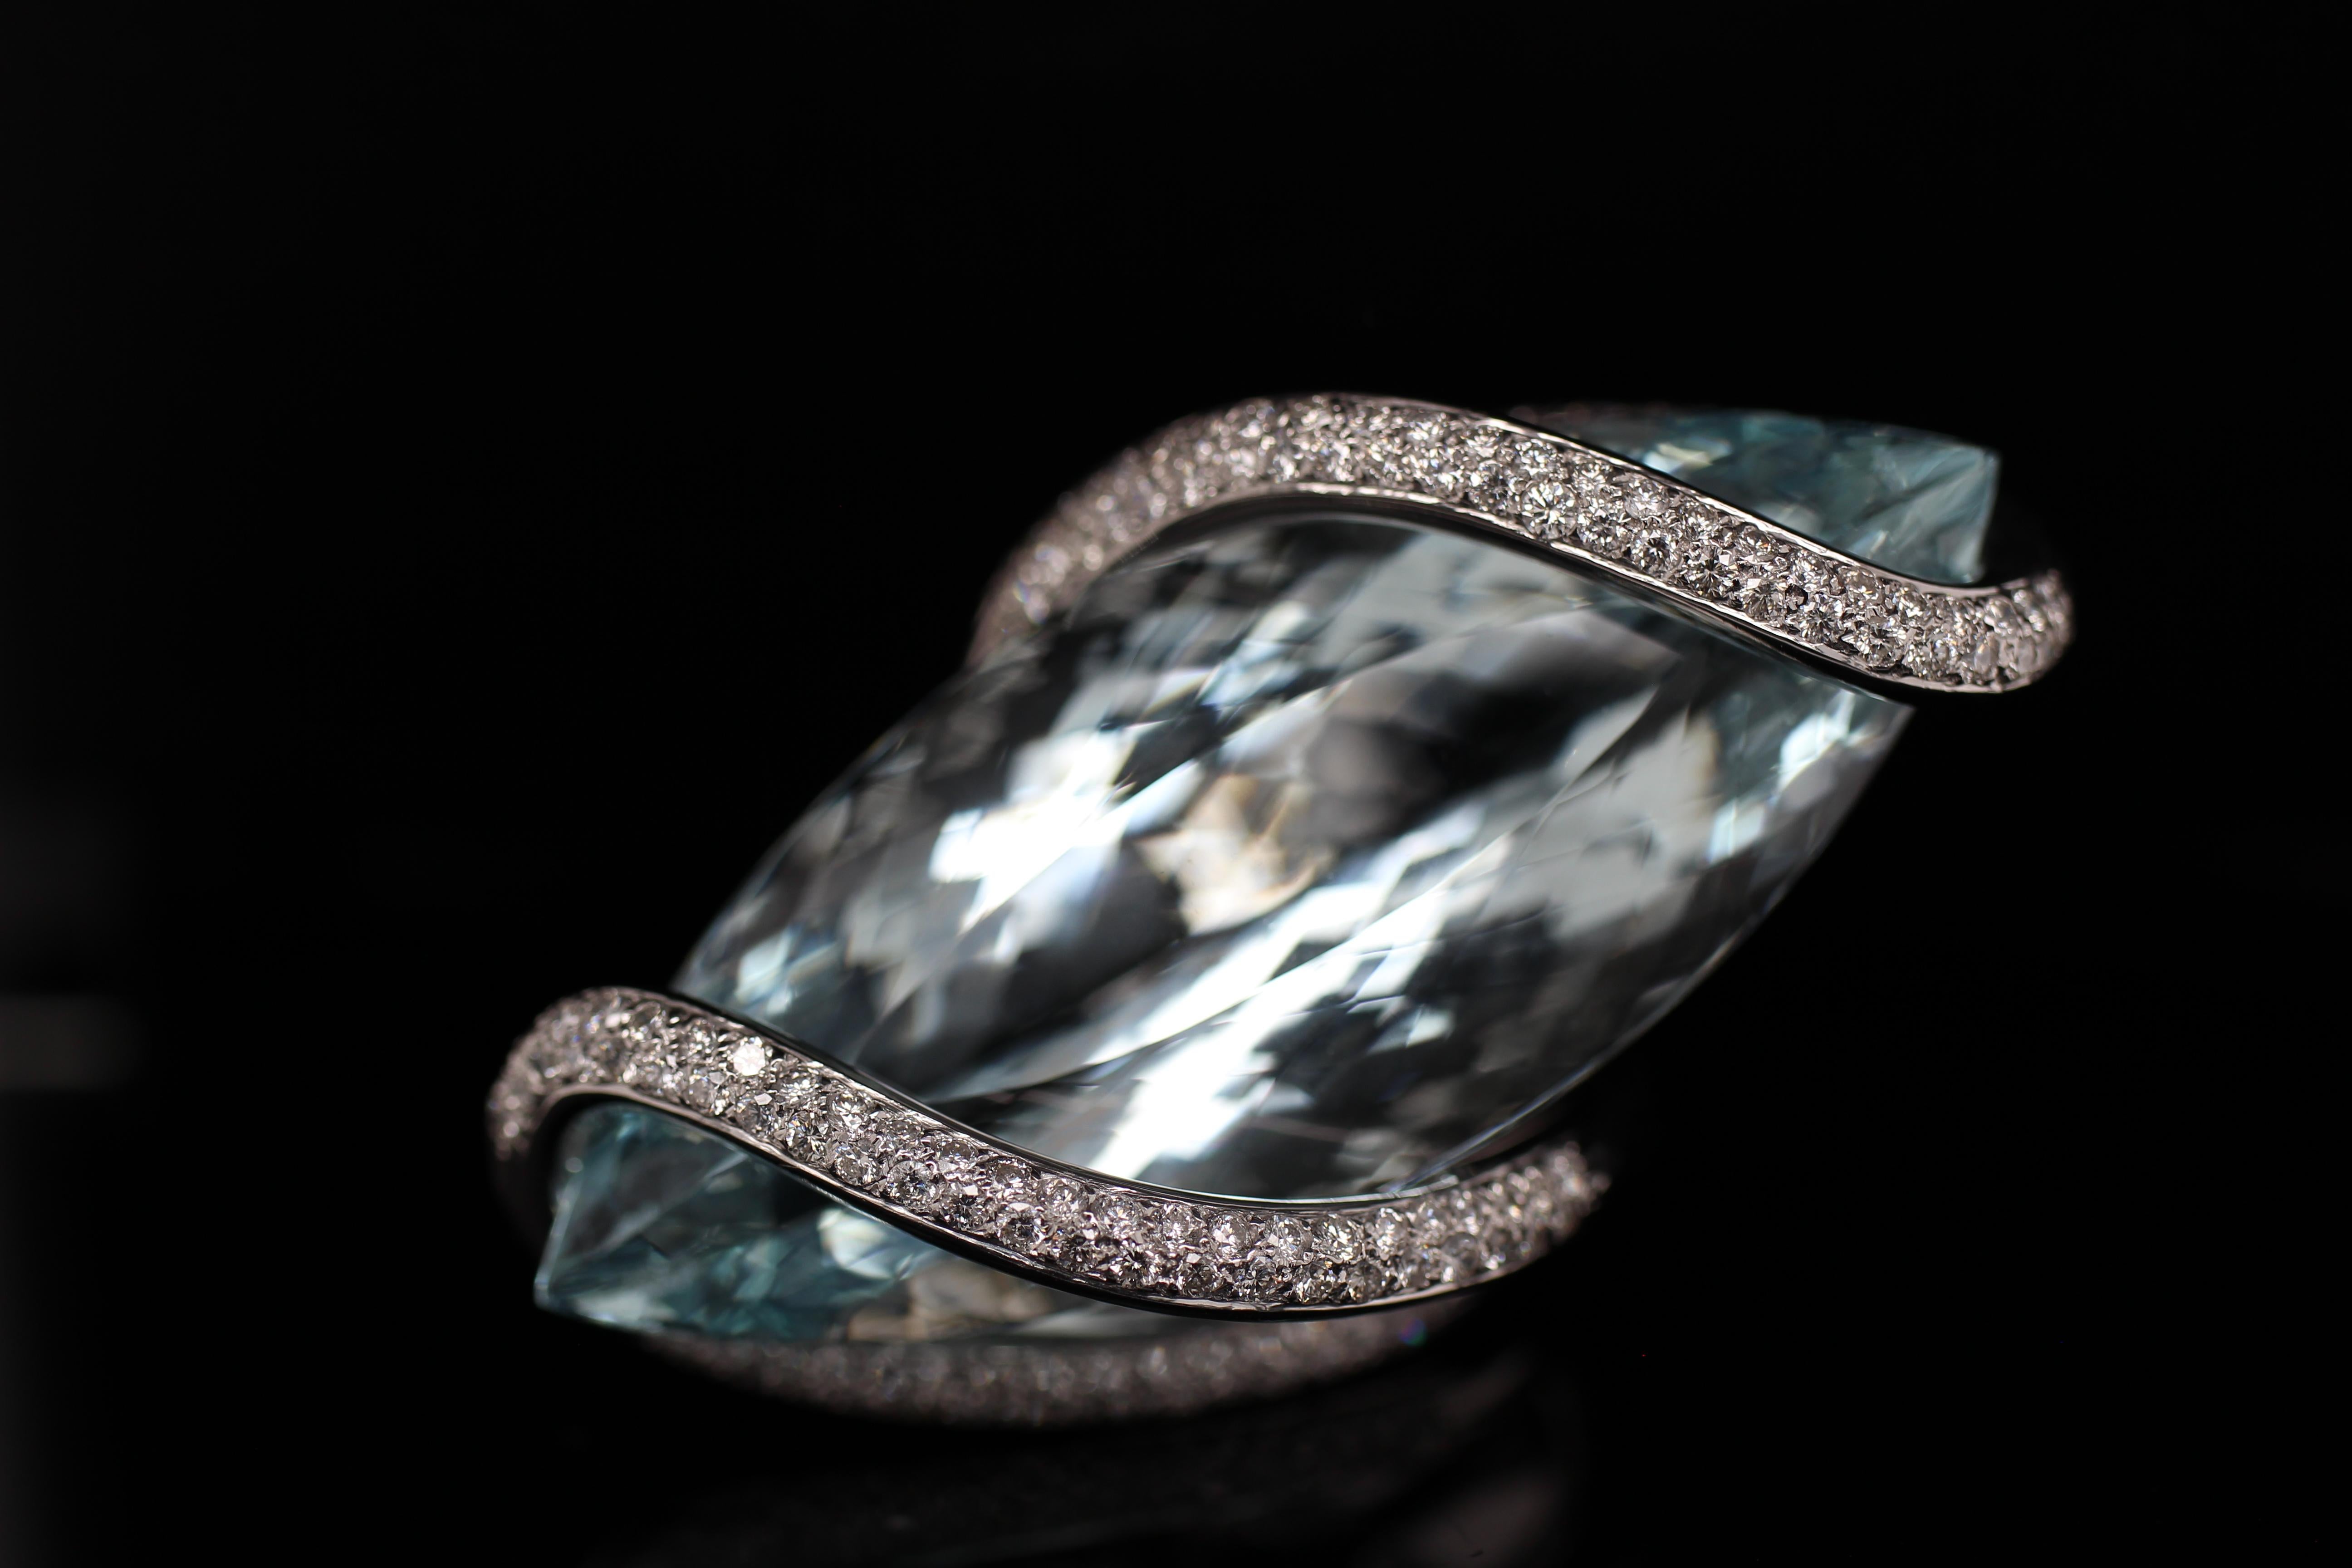 18kt Solid White Gold Huge 150ct Marquise cut Aquamarine Ring  With 4.6ct Diamonds 

One of a kind hand made jewellery piece of art with extremely rare collectable blue Aquamarine of ca. 150 ct !  

Material: 18kt solid white gold (67,8